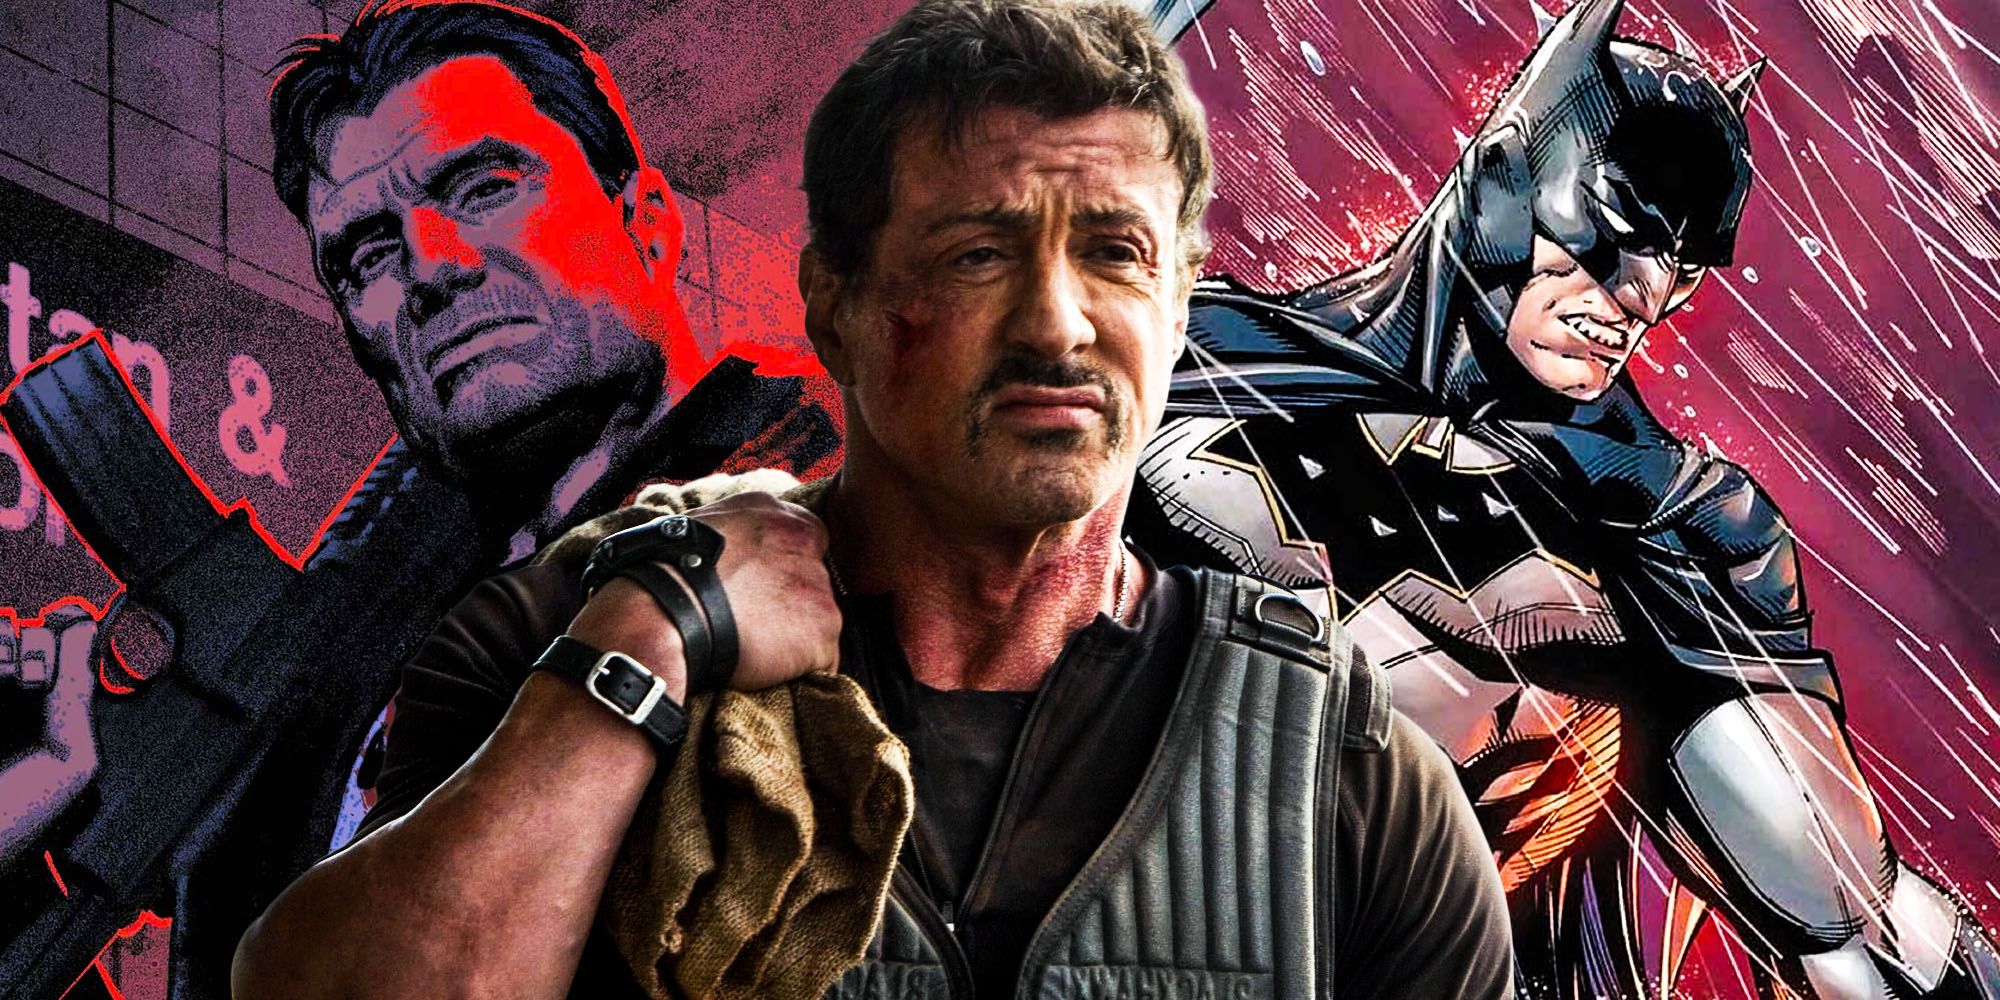 Sylvester Stallone on playing Batman the punisher